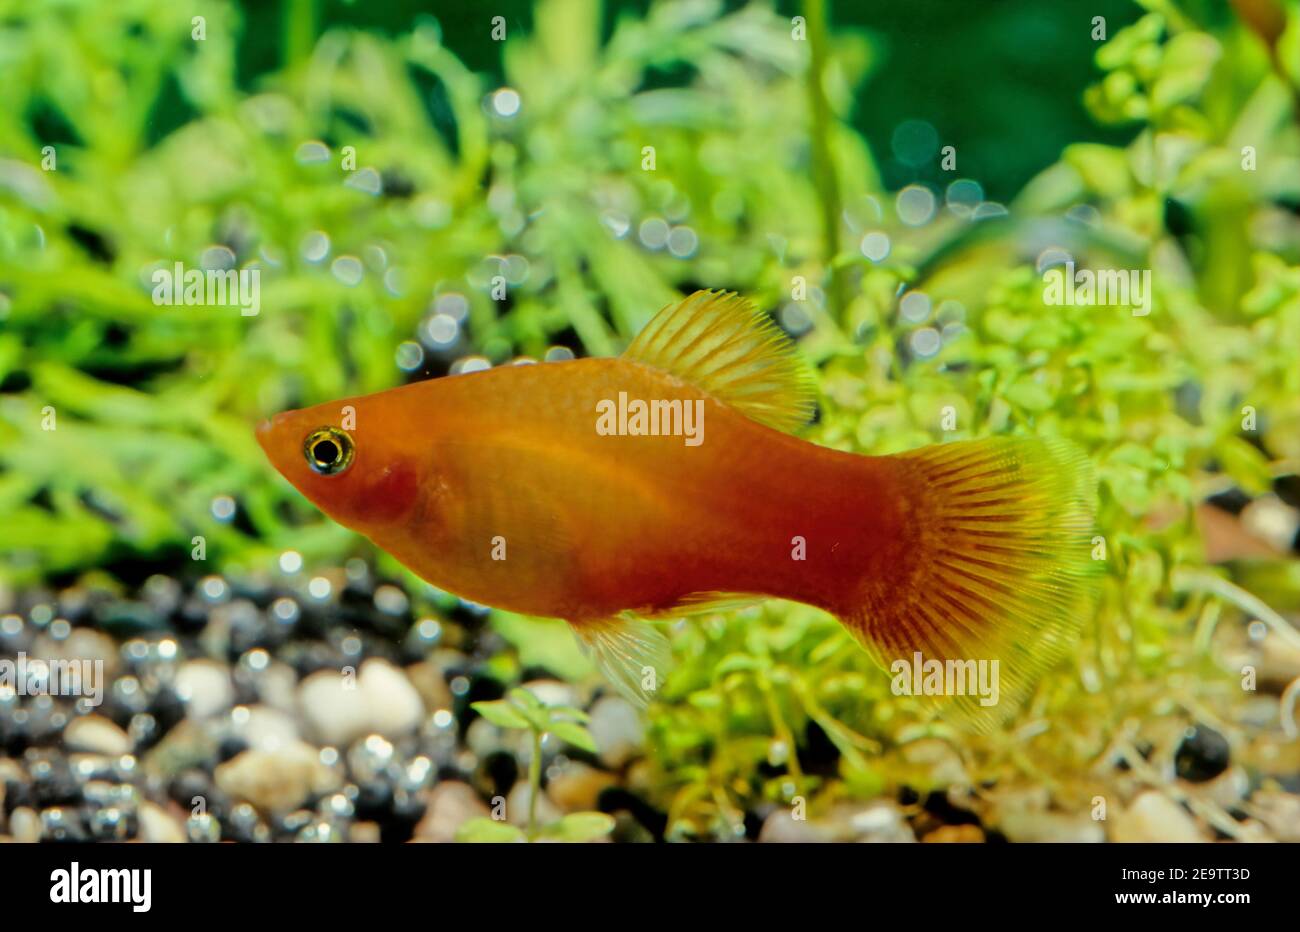 The variable platyfish (Xiphophorus variatus), also known as variatus platy or variegated platy, is a species of freshwater fish in family Poecilidae Stock Photo